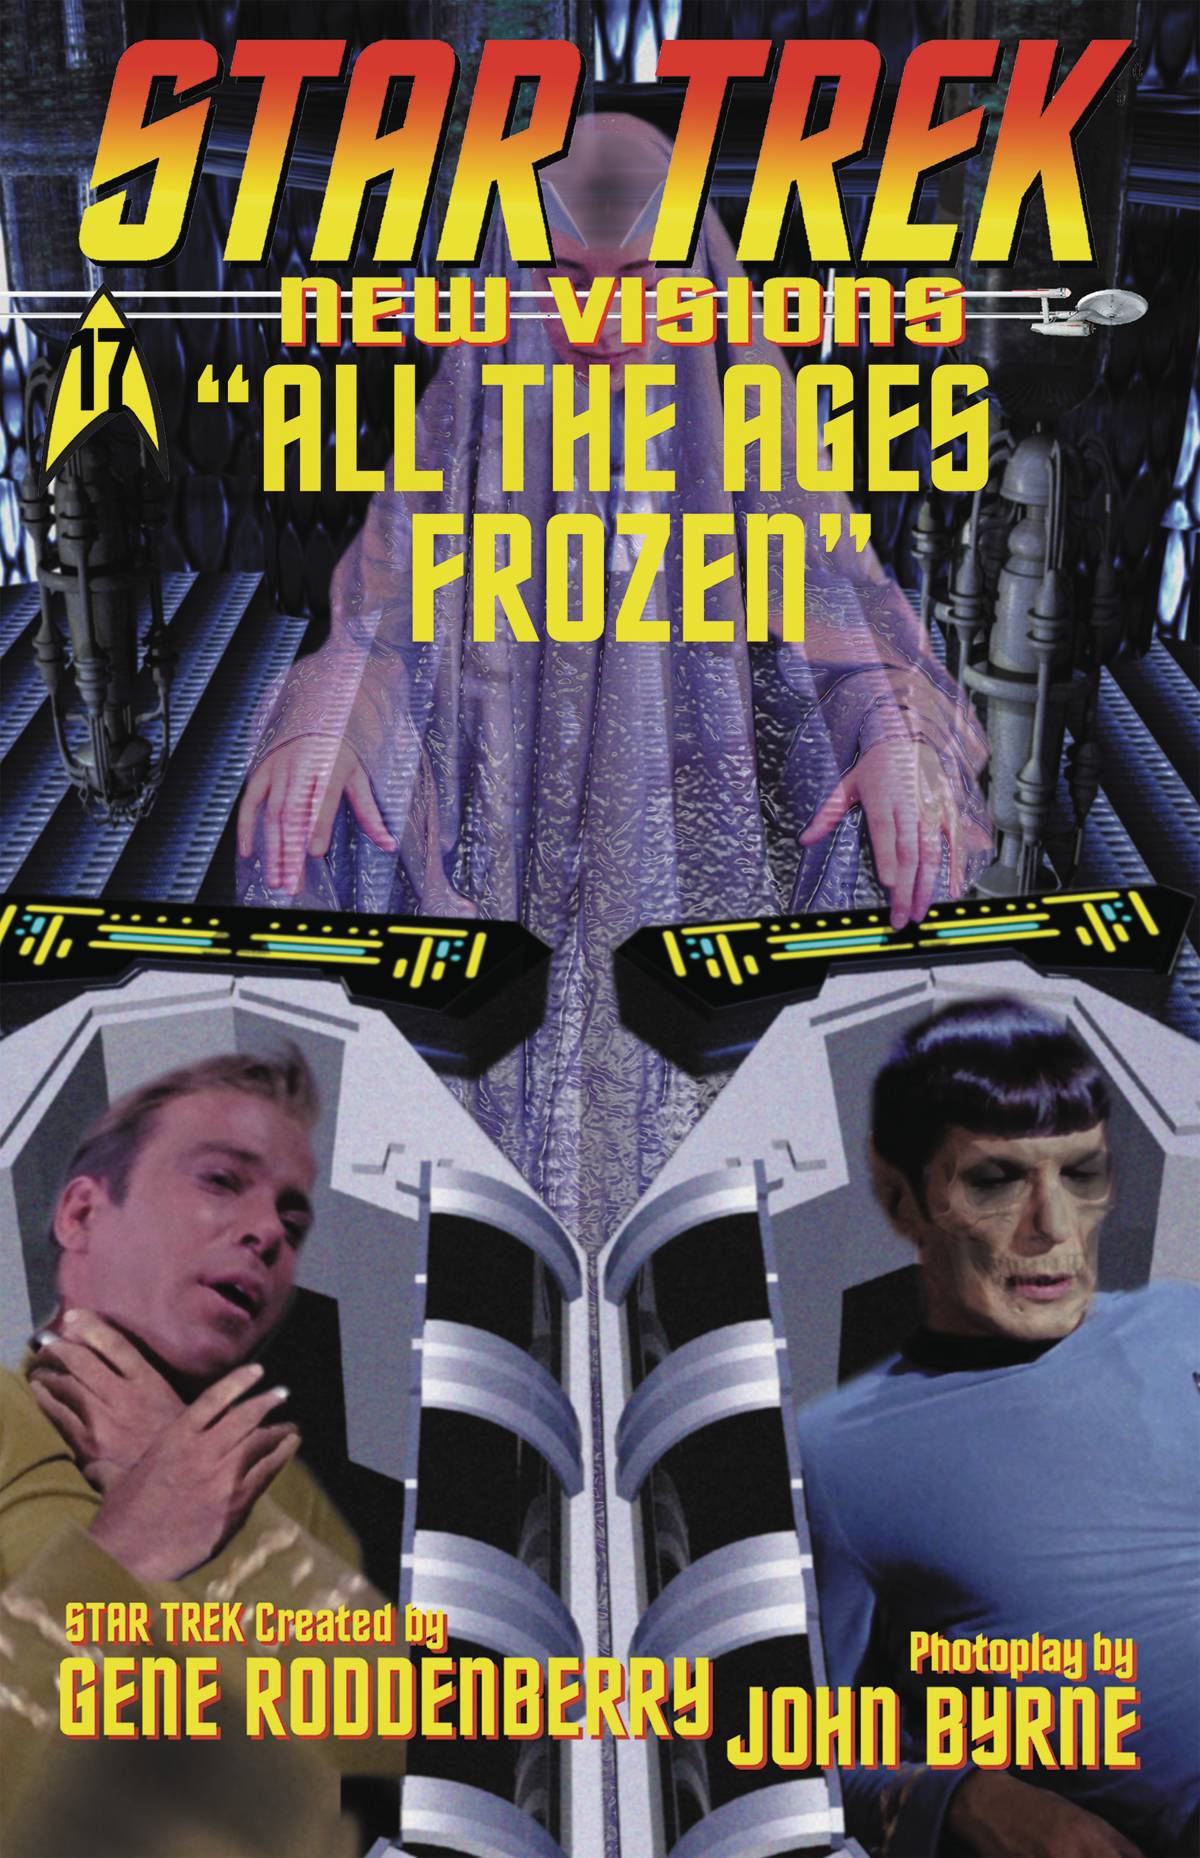 STAR TREK: NEW VISIONS#17: ALL THE AGES FROZEN